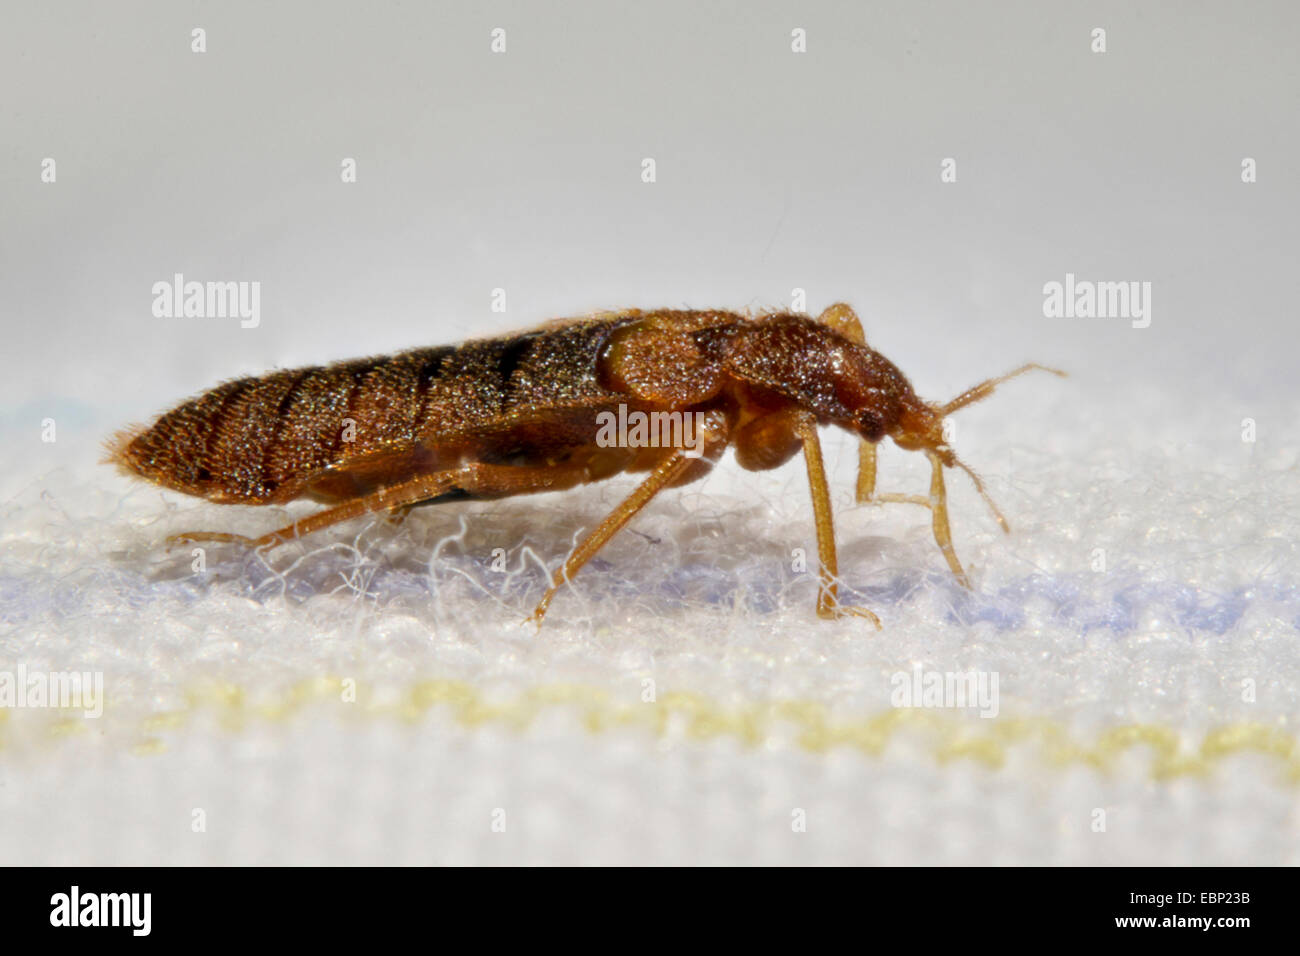 Bedbug, Common bedbug, Wall-louse (Cimex lectularius), in bed Stock Photo